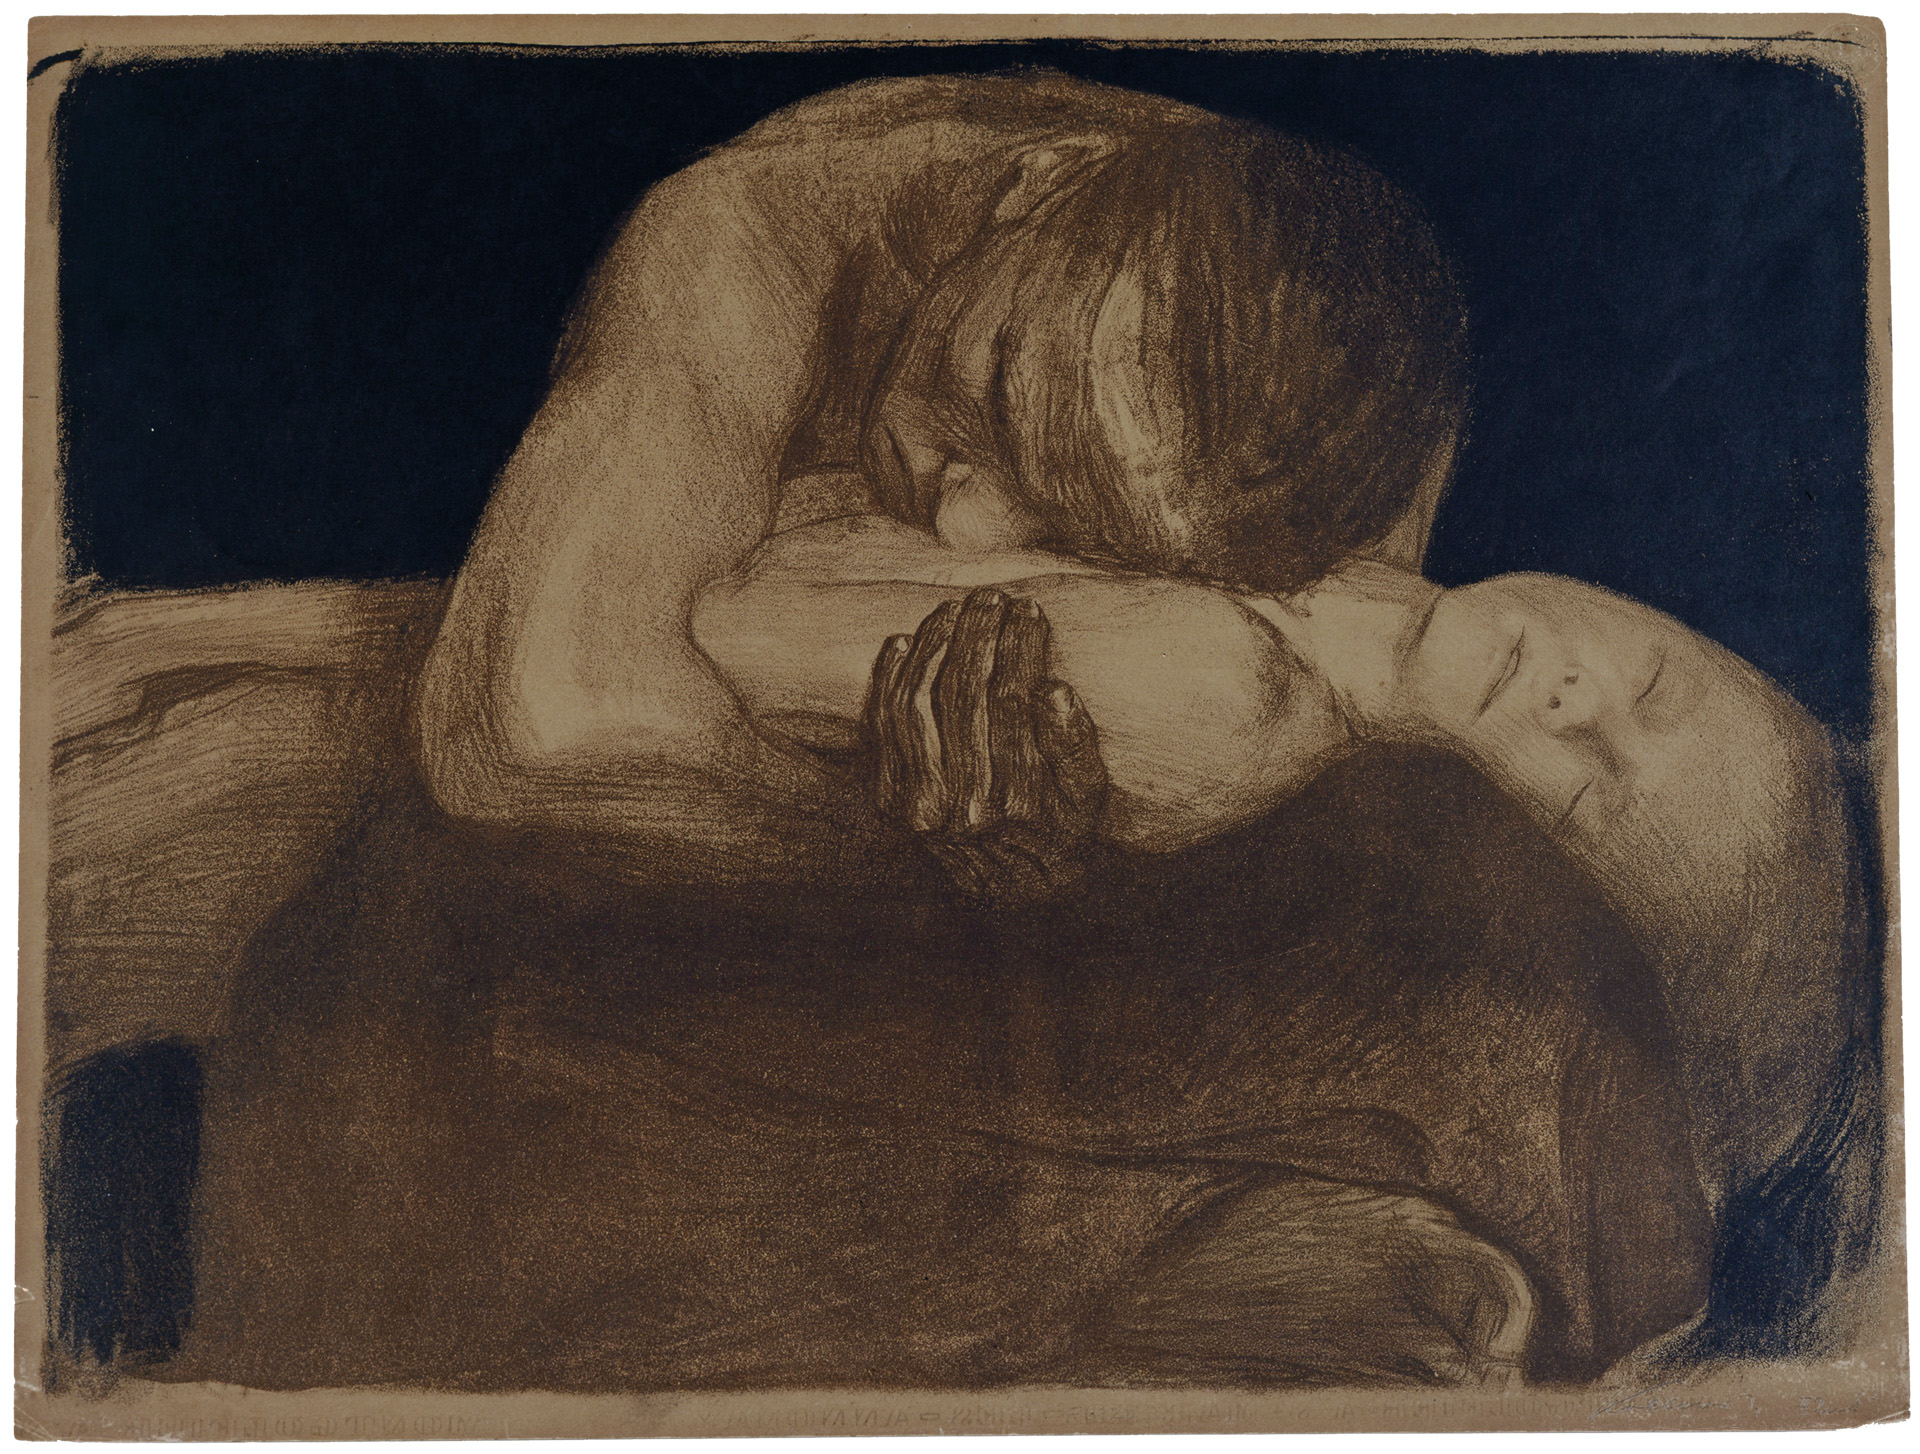 Käthe Kolwitz, Pietà, 1903, crayon and brush lithograph in two colors, with scratch technique on the drawing stone, Kn 77, Cologne Kollwitz Collection © Käthe Kollwitz Museum Köln